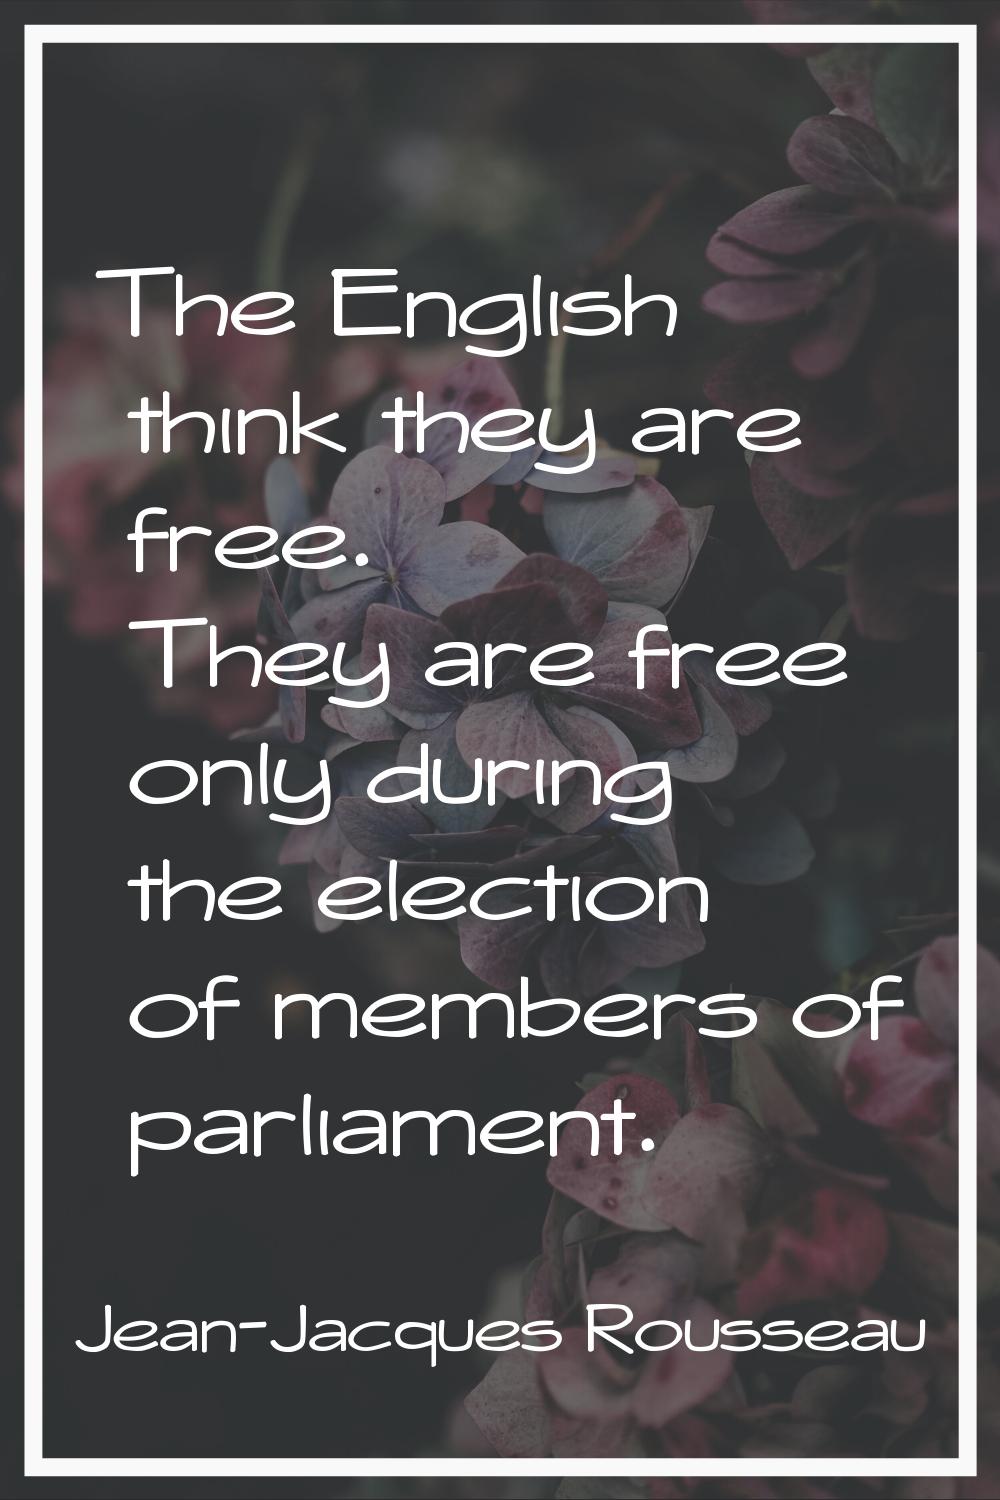 The English think they are free. They are free only during the election of members of parliament.